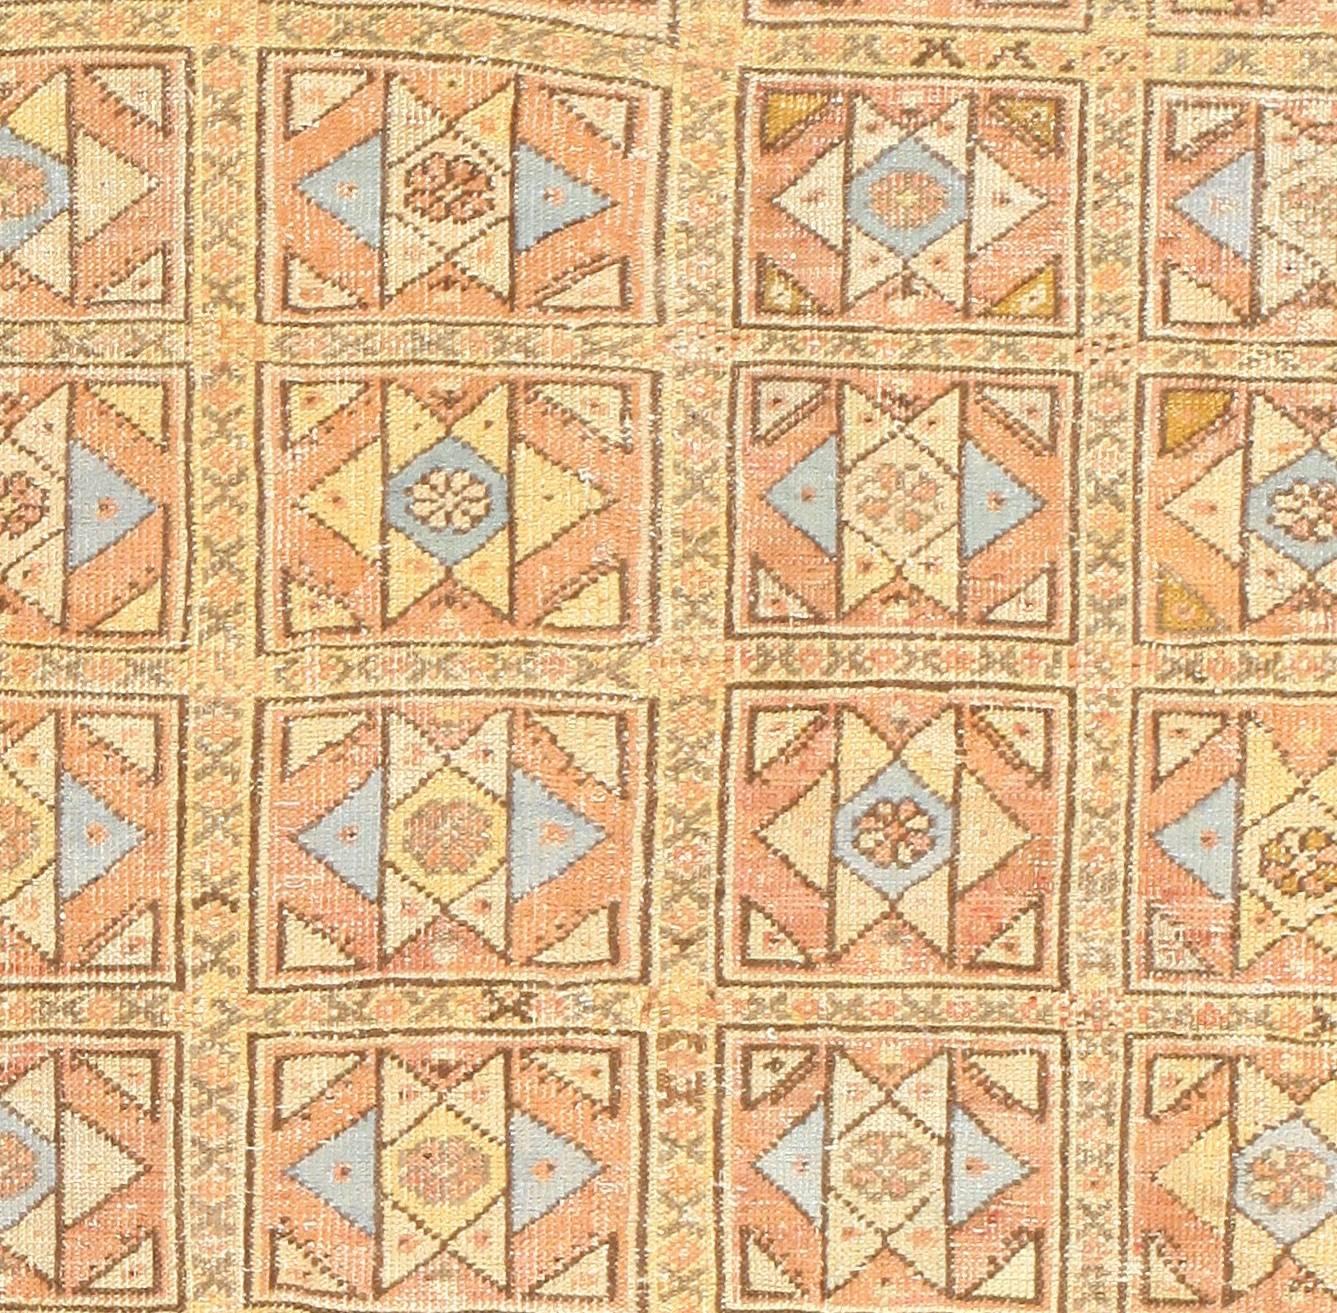 Square Size Antique Decorative Turkish Oushak Rug, Country of Origin: Turkey, Circa date: 1900. Size: 6 ft 8 in x 6 ft 8 in (2.03 m x 2.03 m)

This square, honey-toned antique Turkish rug features a central design of crossed parallelograms, each